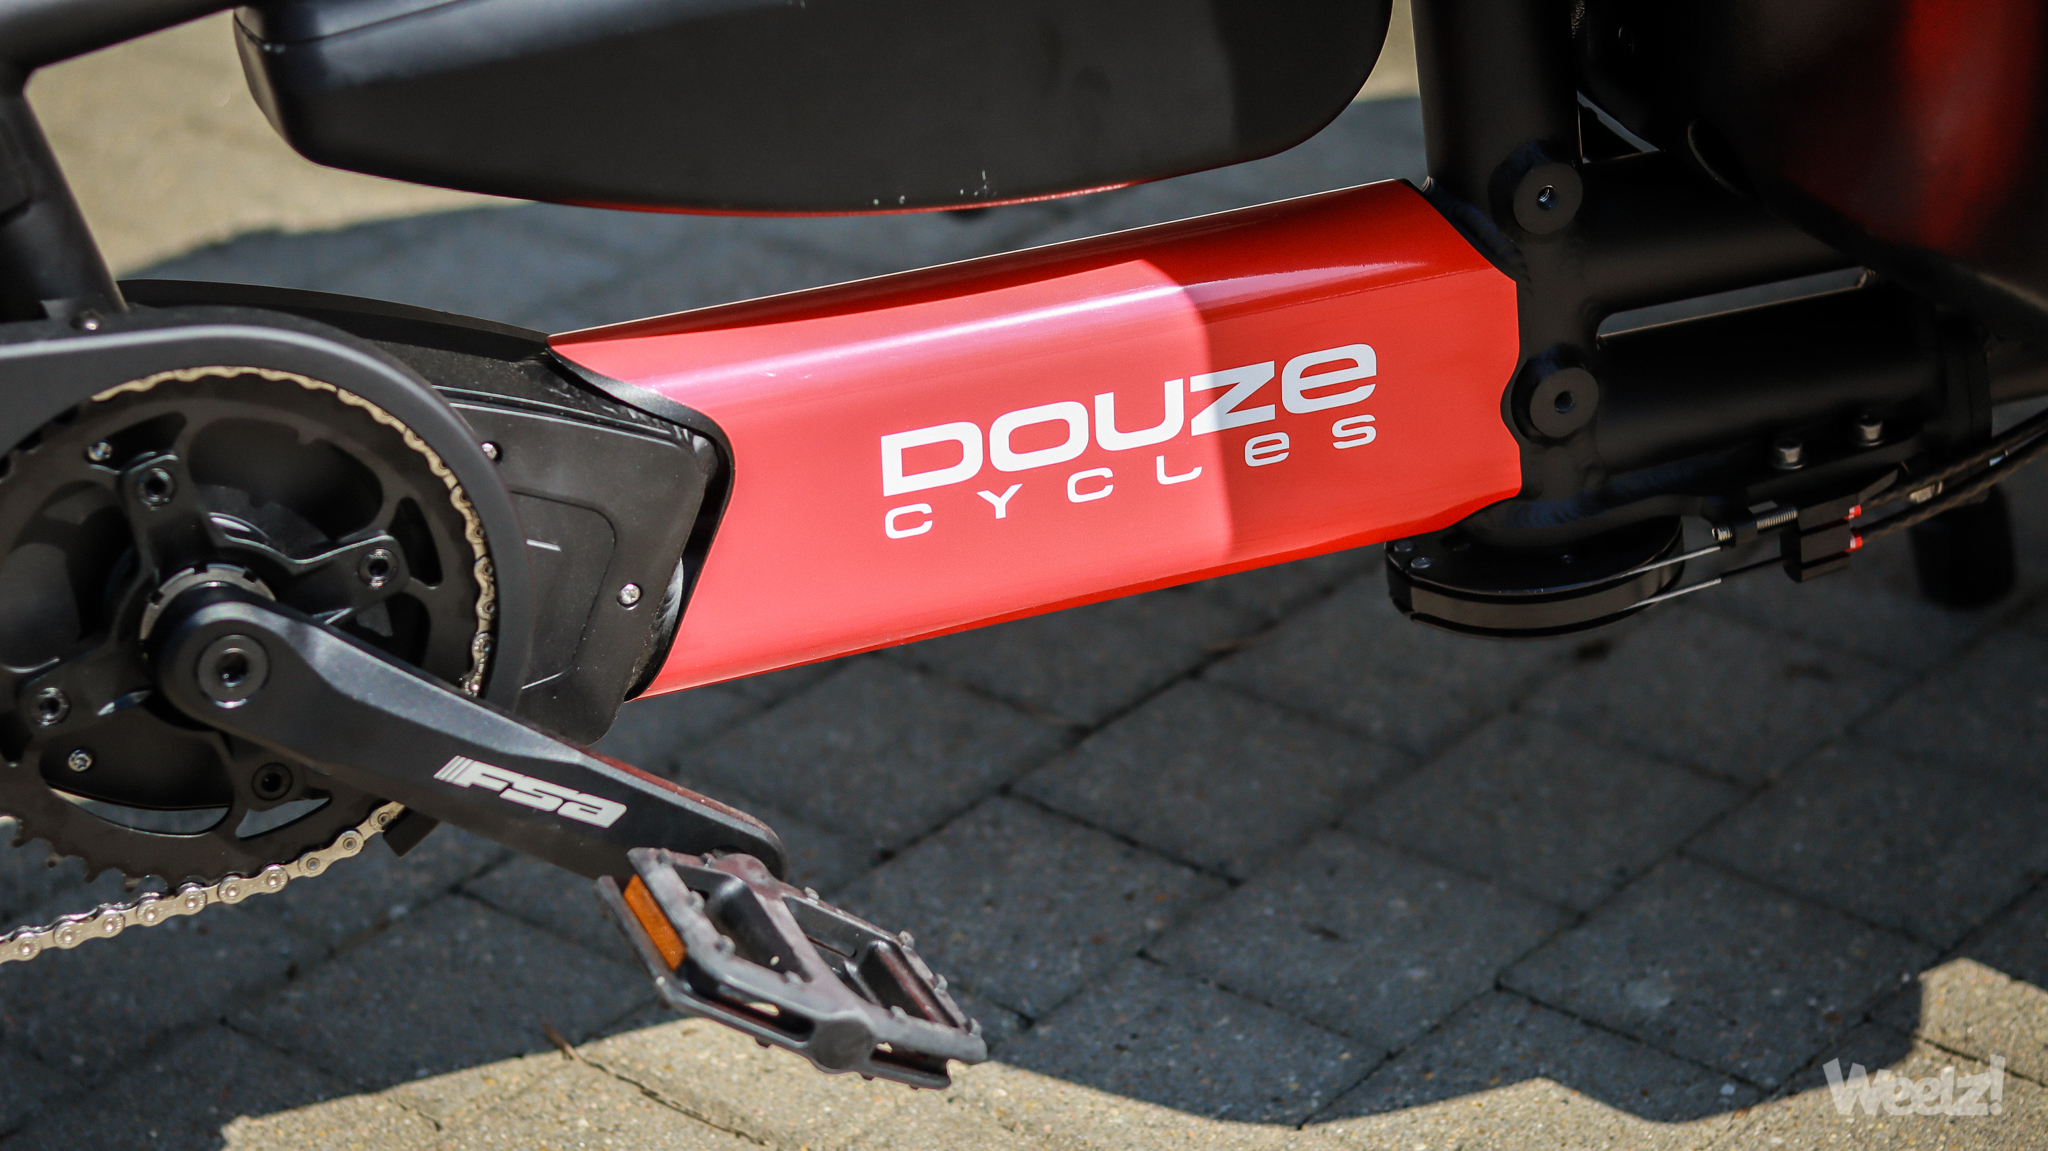 1667898675 286 Douze Cycles a key player in the cargo bike landscape